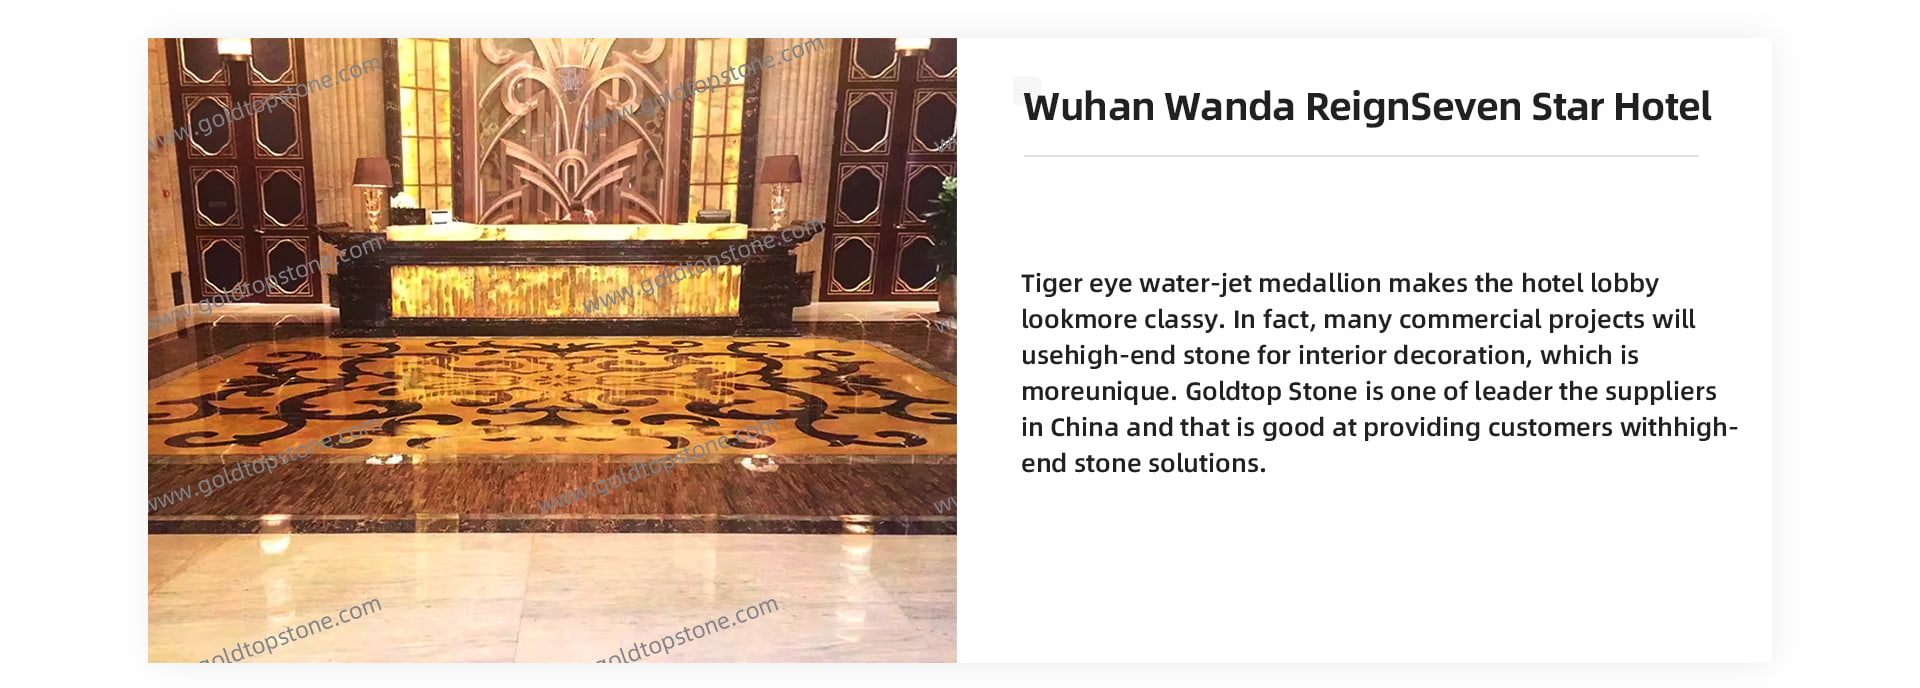 Tiger eye water-jet medallion makes the hotel lobby look more classy. In fact, many commercial projects will use high-end stone for interior decoration, which is more unique. Goldtop Stone is one of leader the suppliers in China and that is good at providing customers with high-end stone solutions.